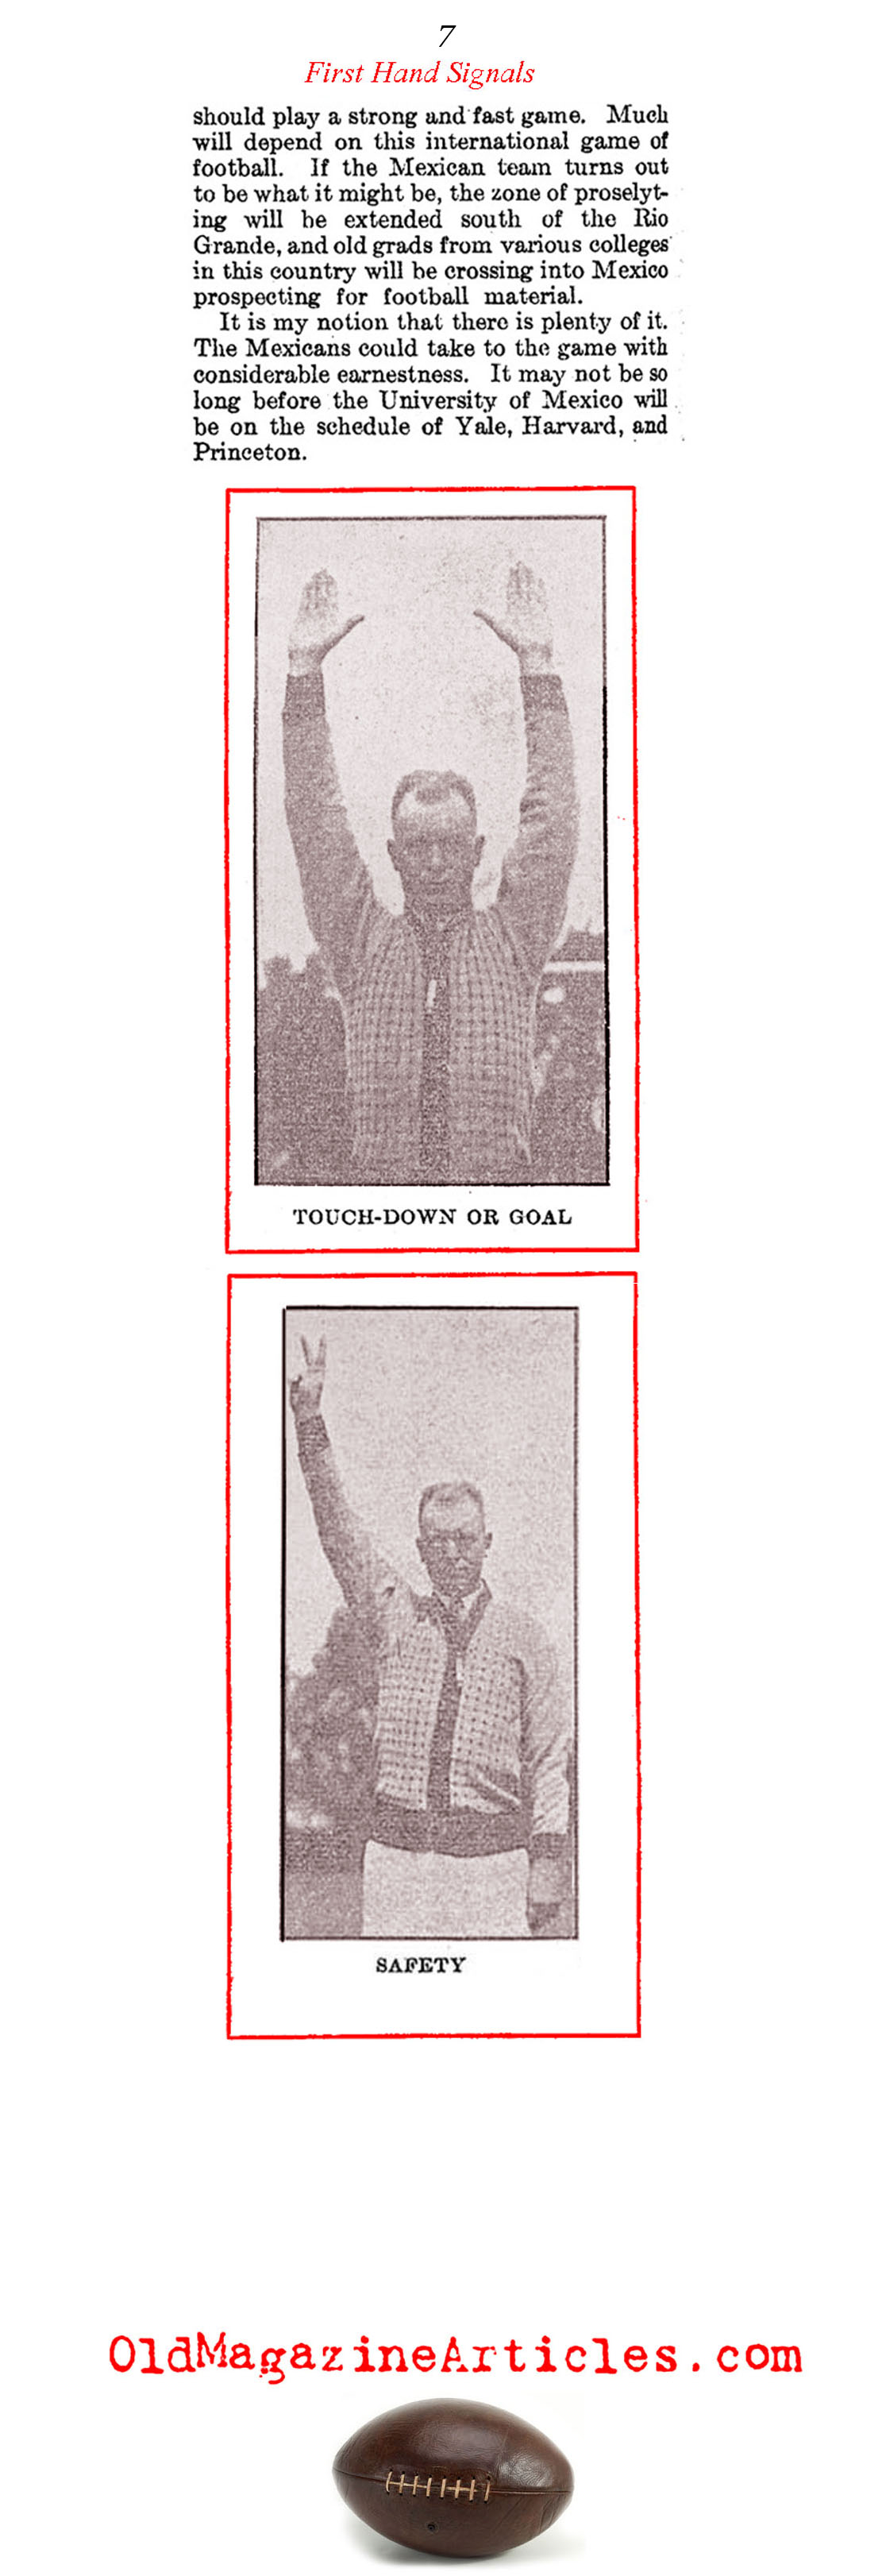 The Very First Football Referee Hand Signals (Literary Digest, 1929)